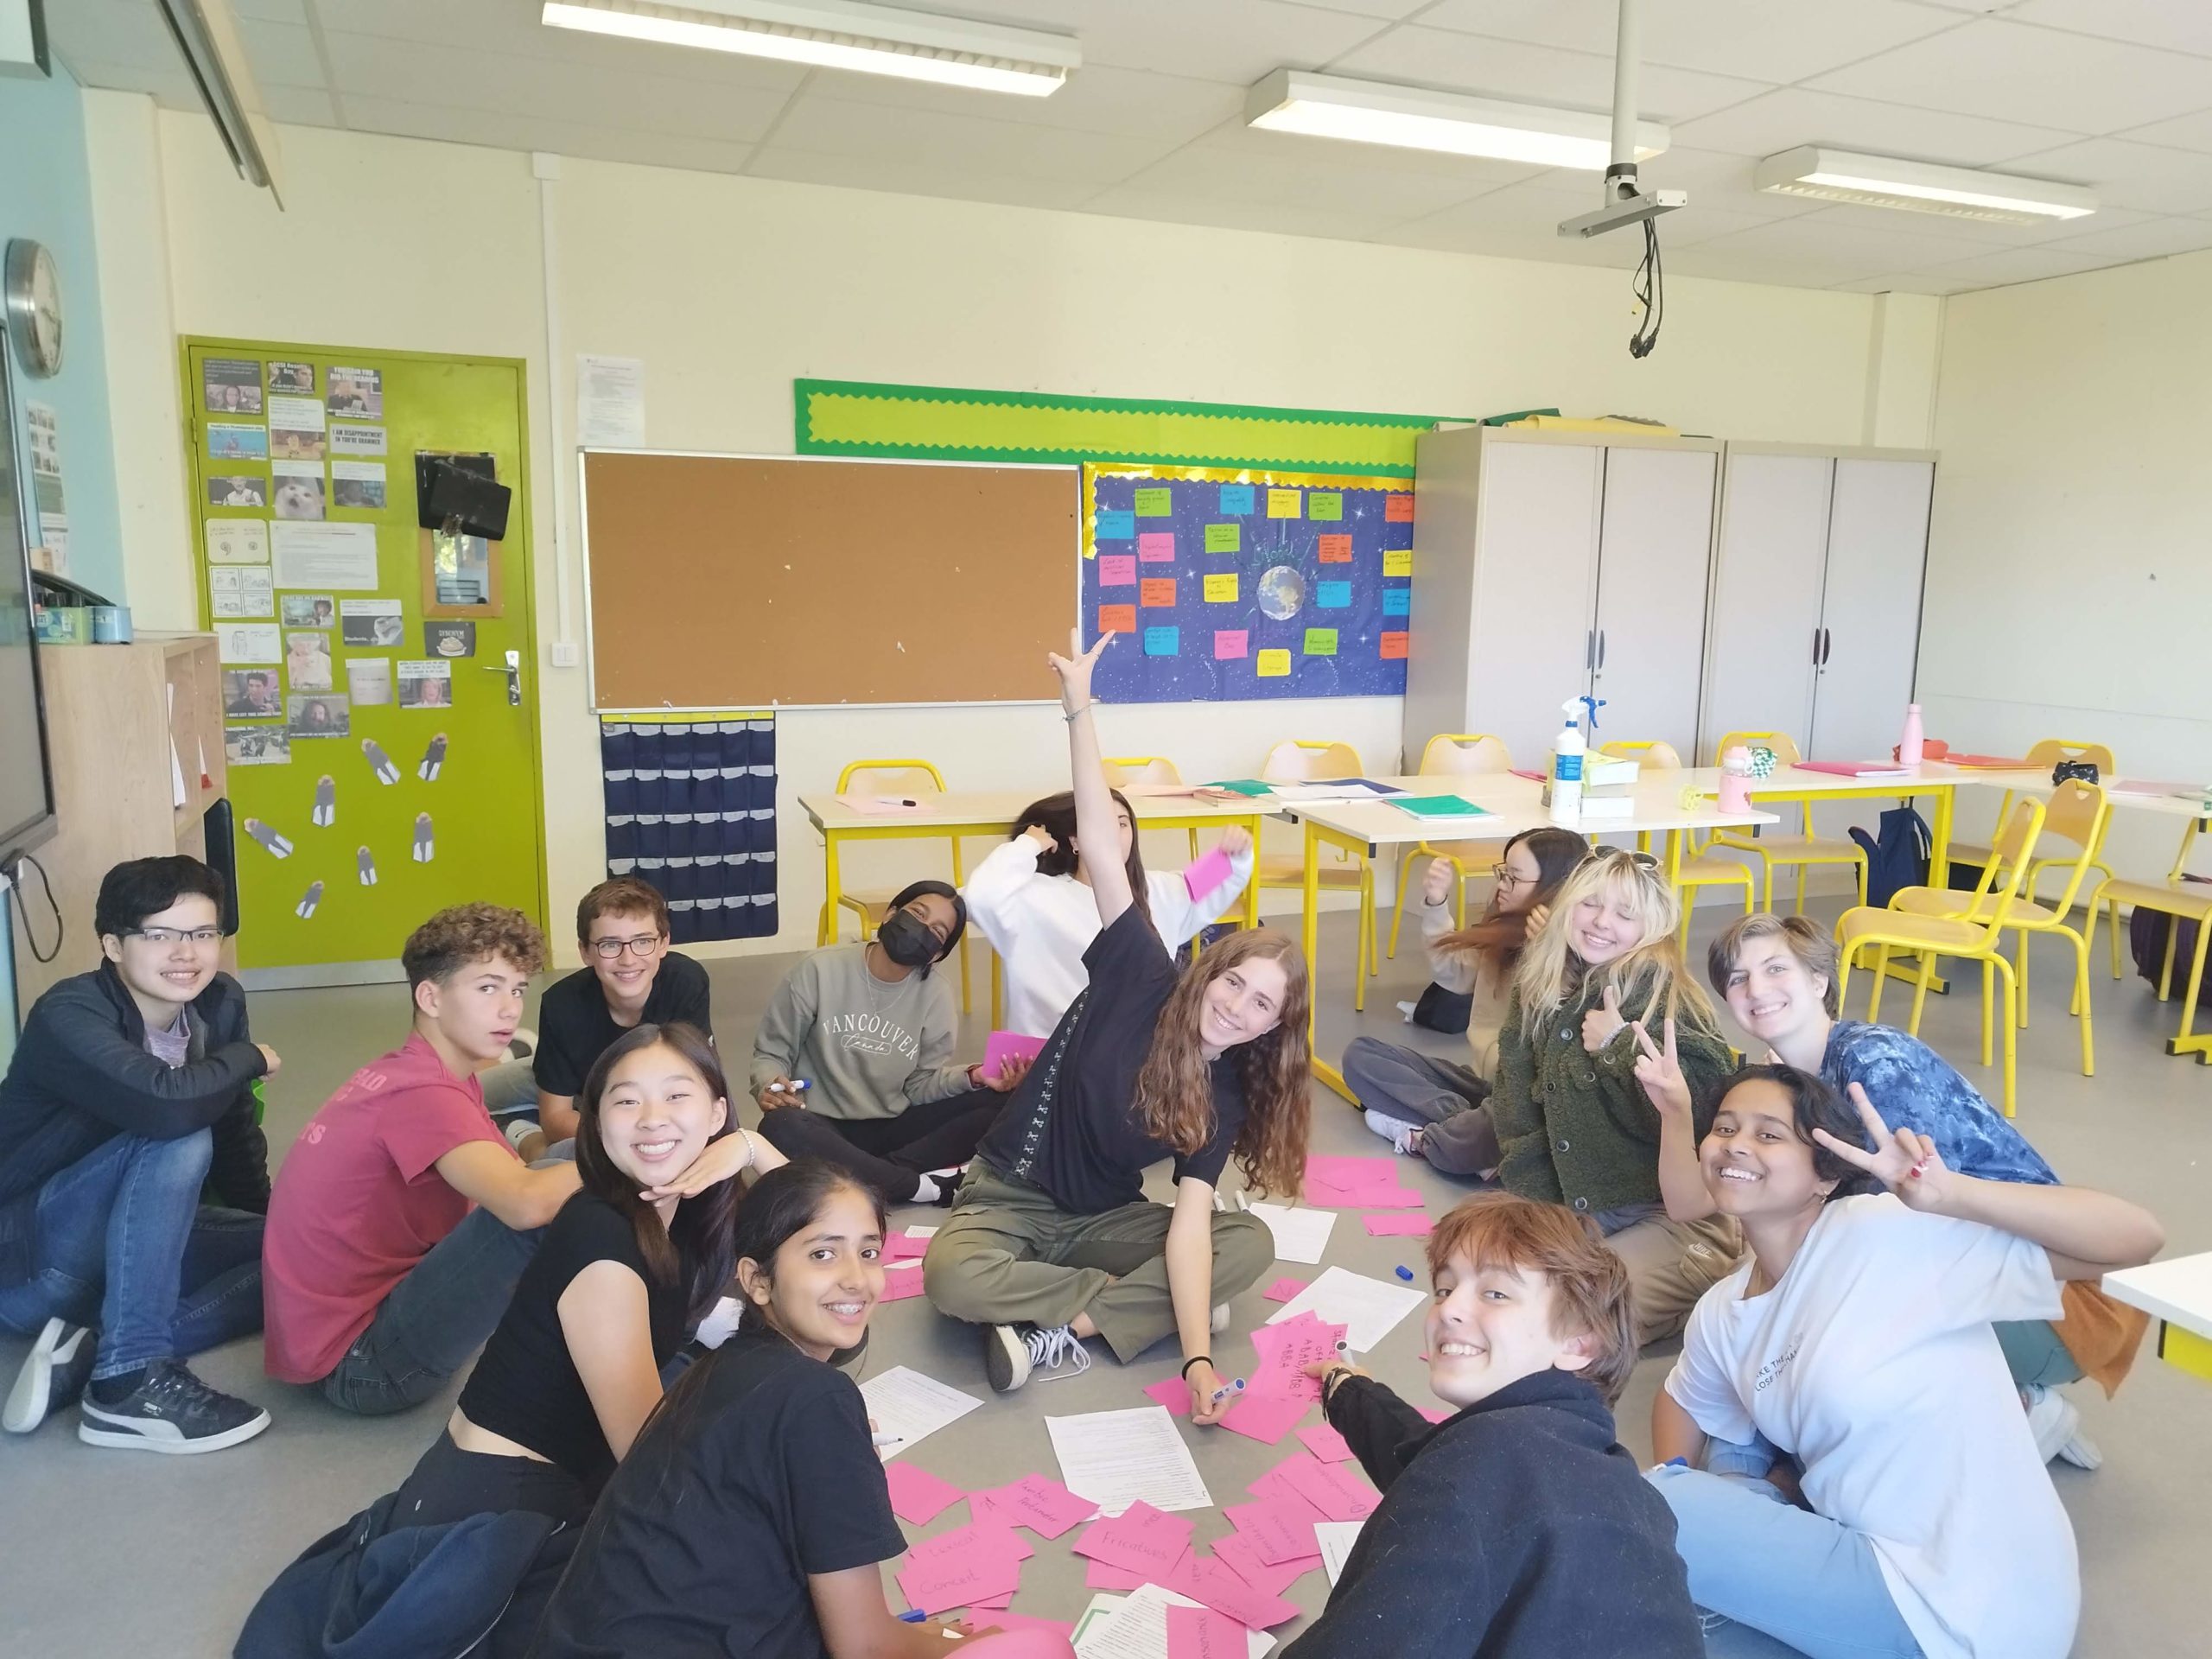 Students sitting in a circle, posing for the camera with red revision game cards on the floor